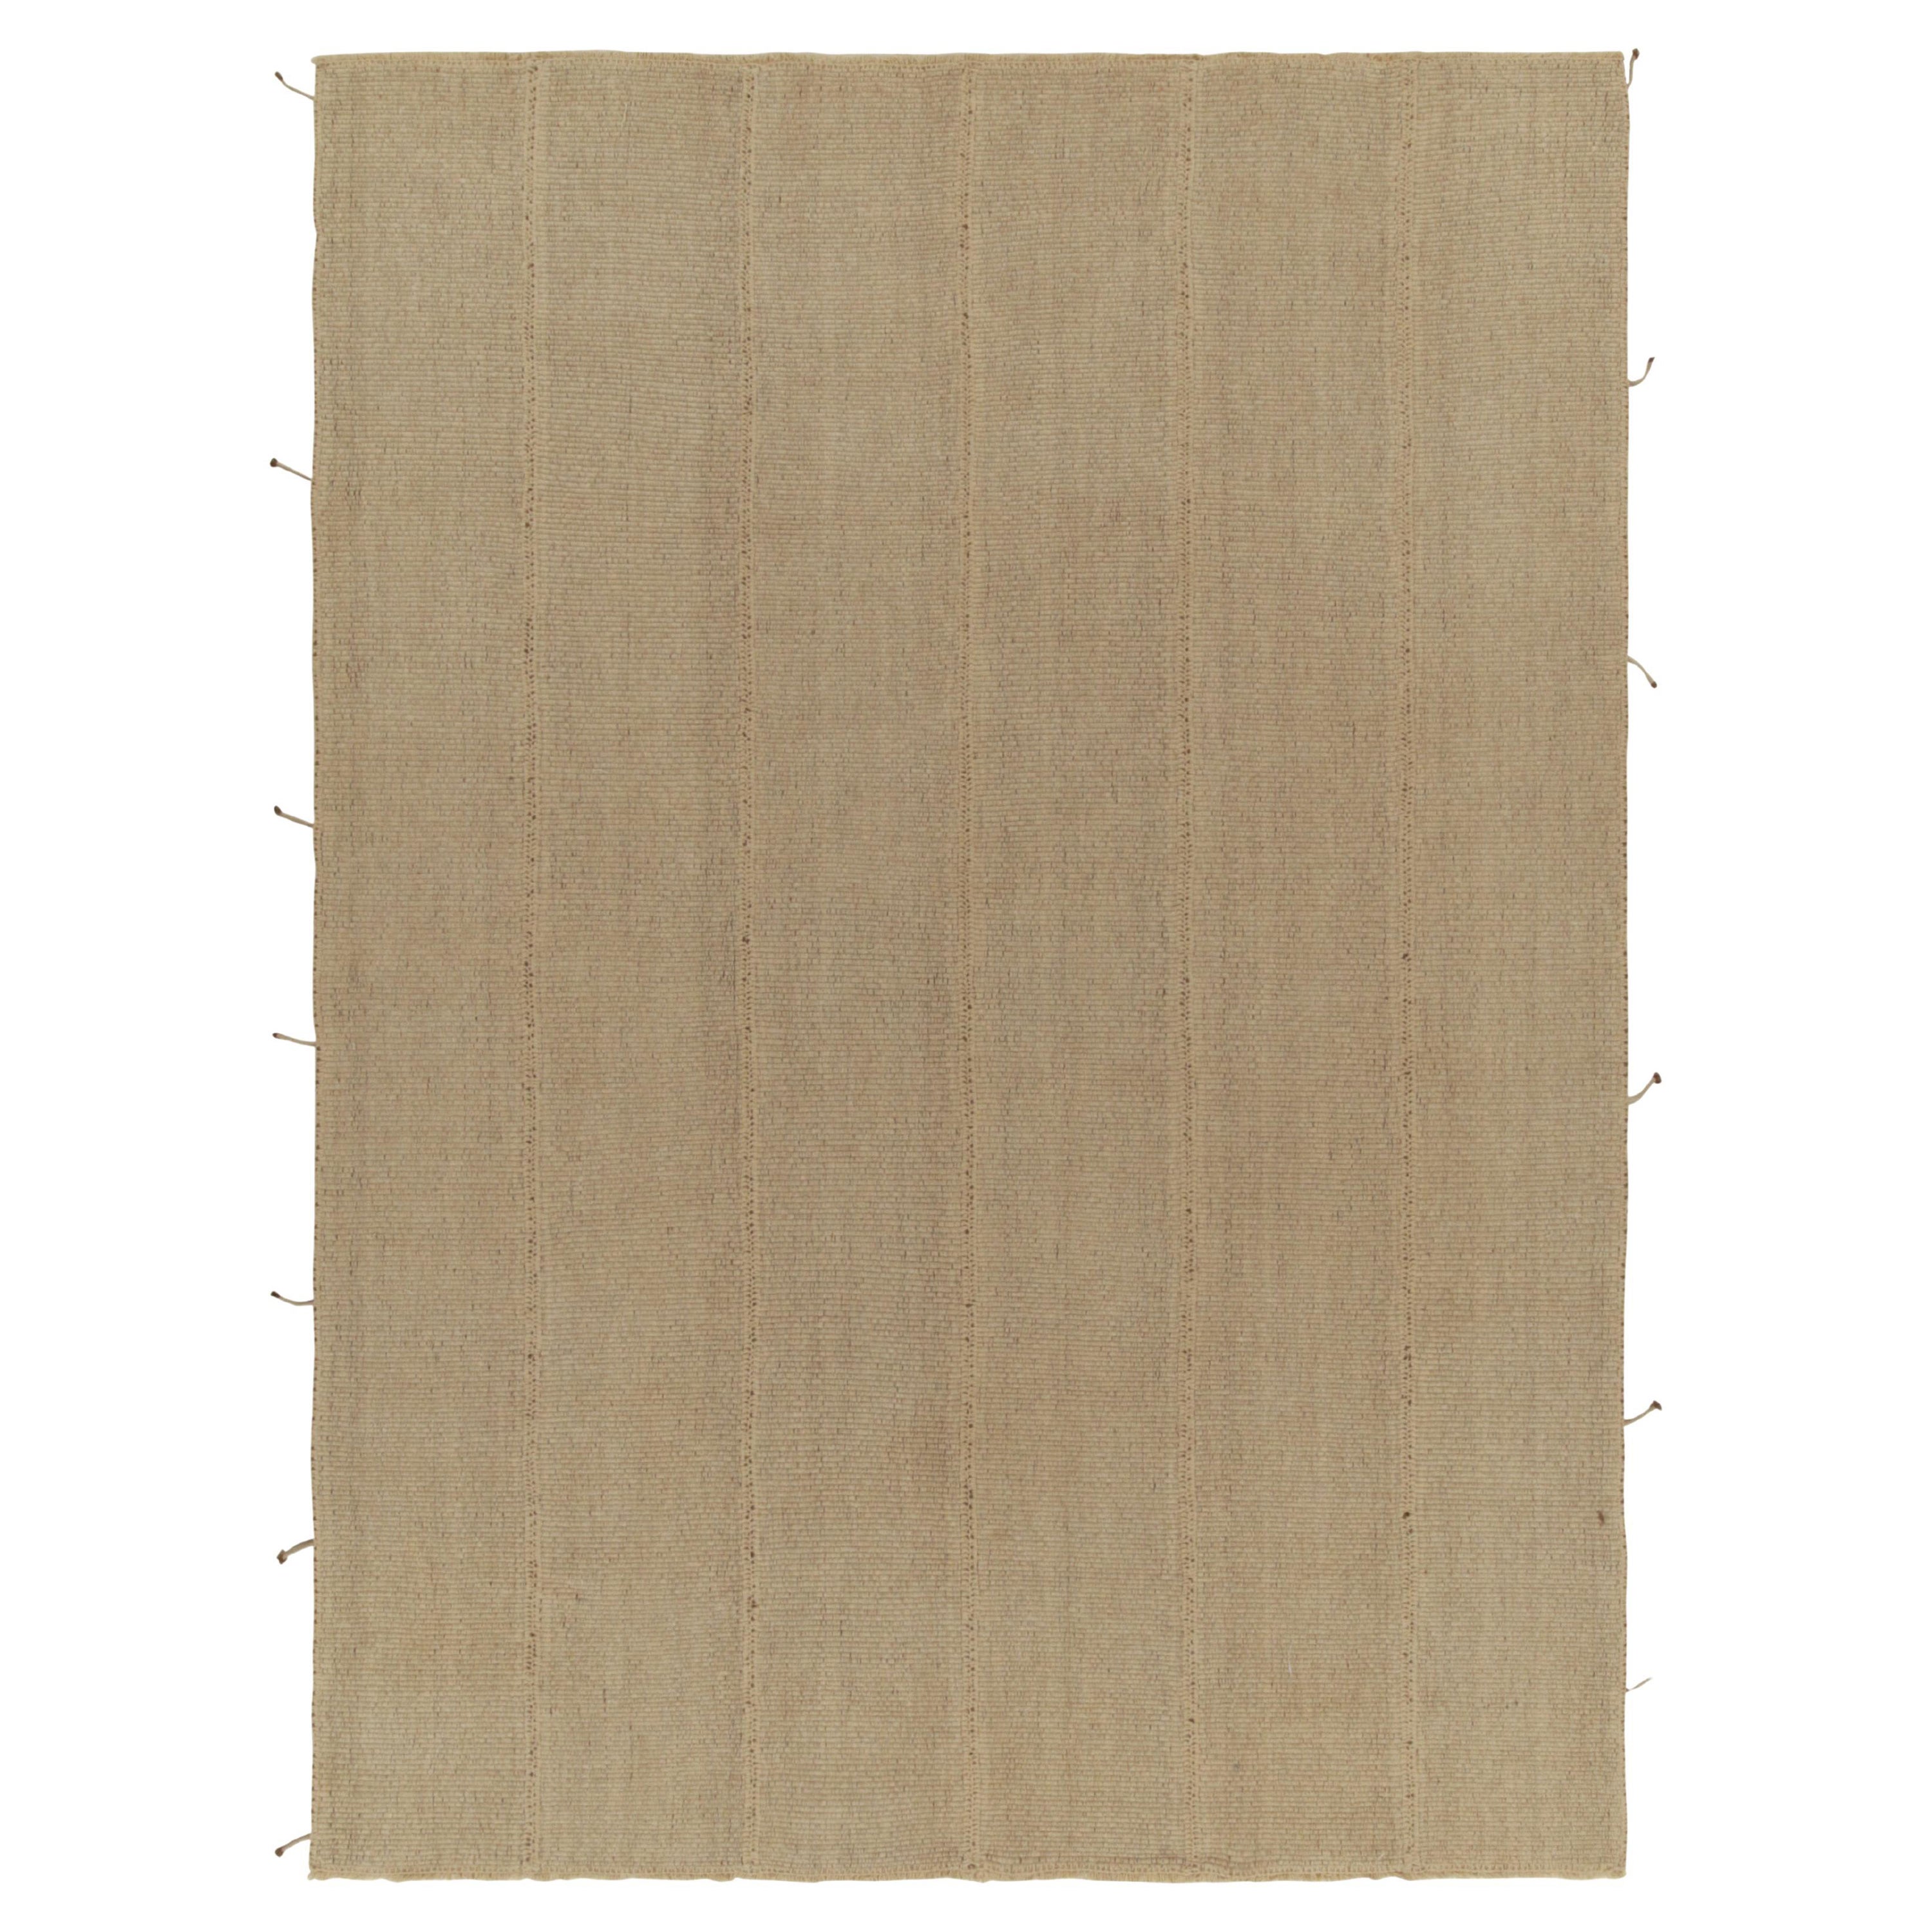 Rug & Kilim’s Contemporary Kilim in Solid, Sandy Beige-Brown Panel Woven Style For Sale